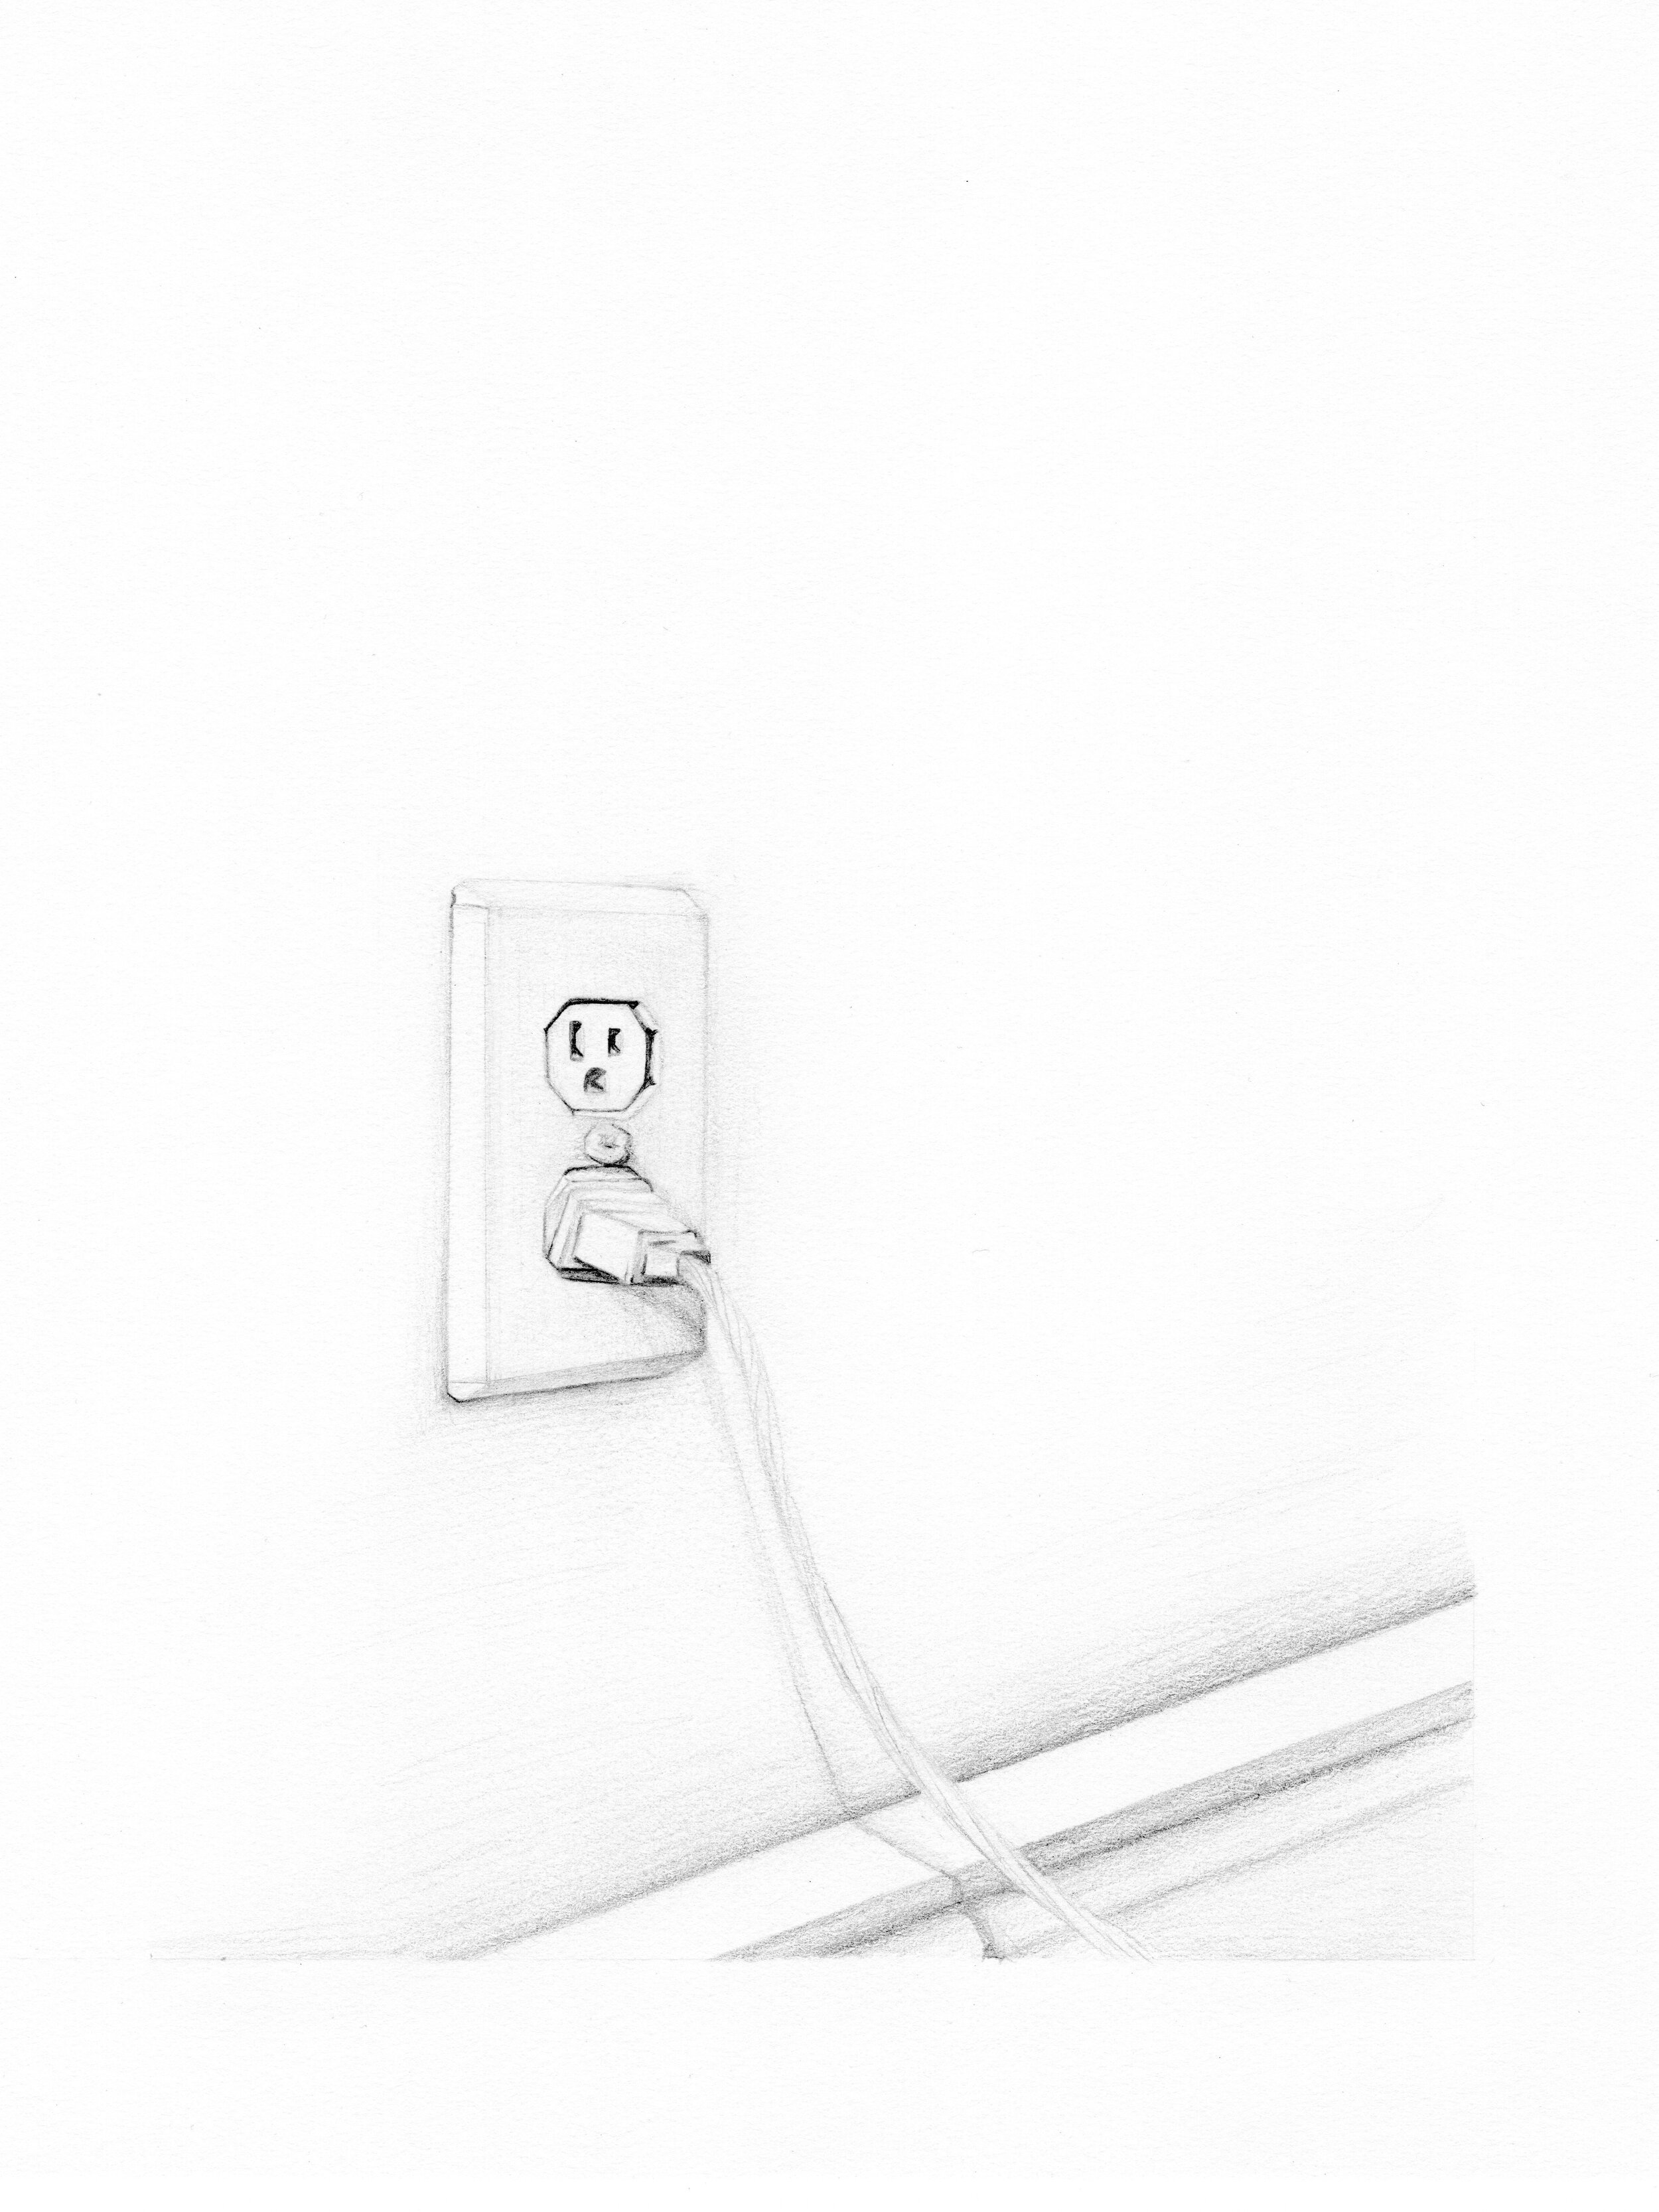 Electrical Outlet.jpg